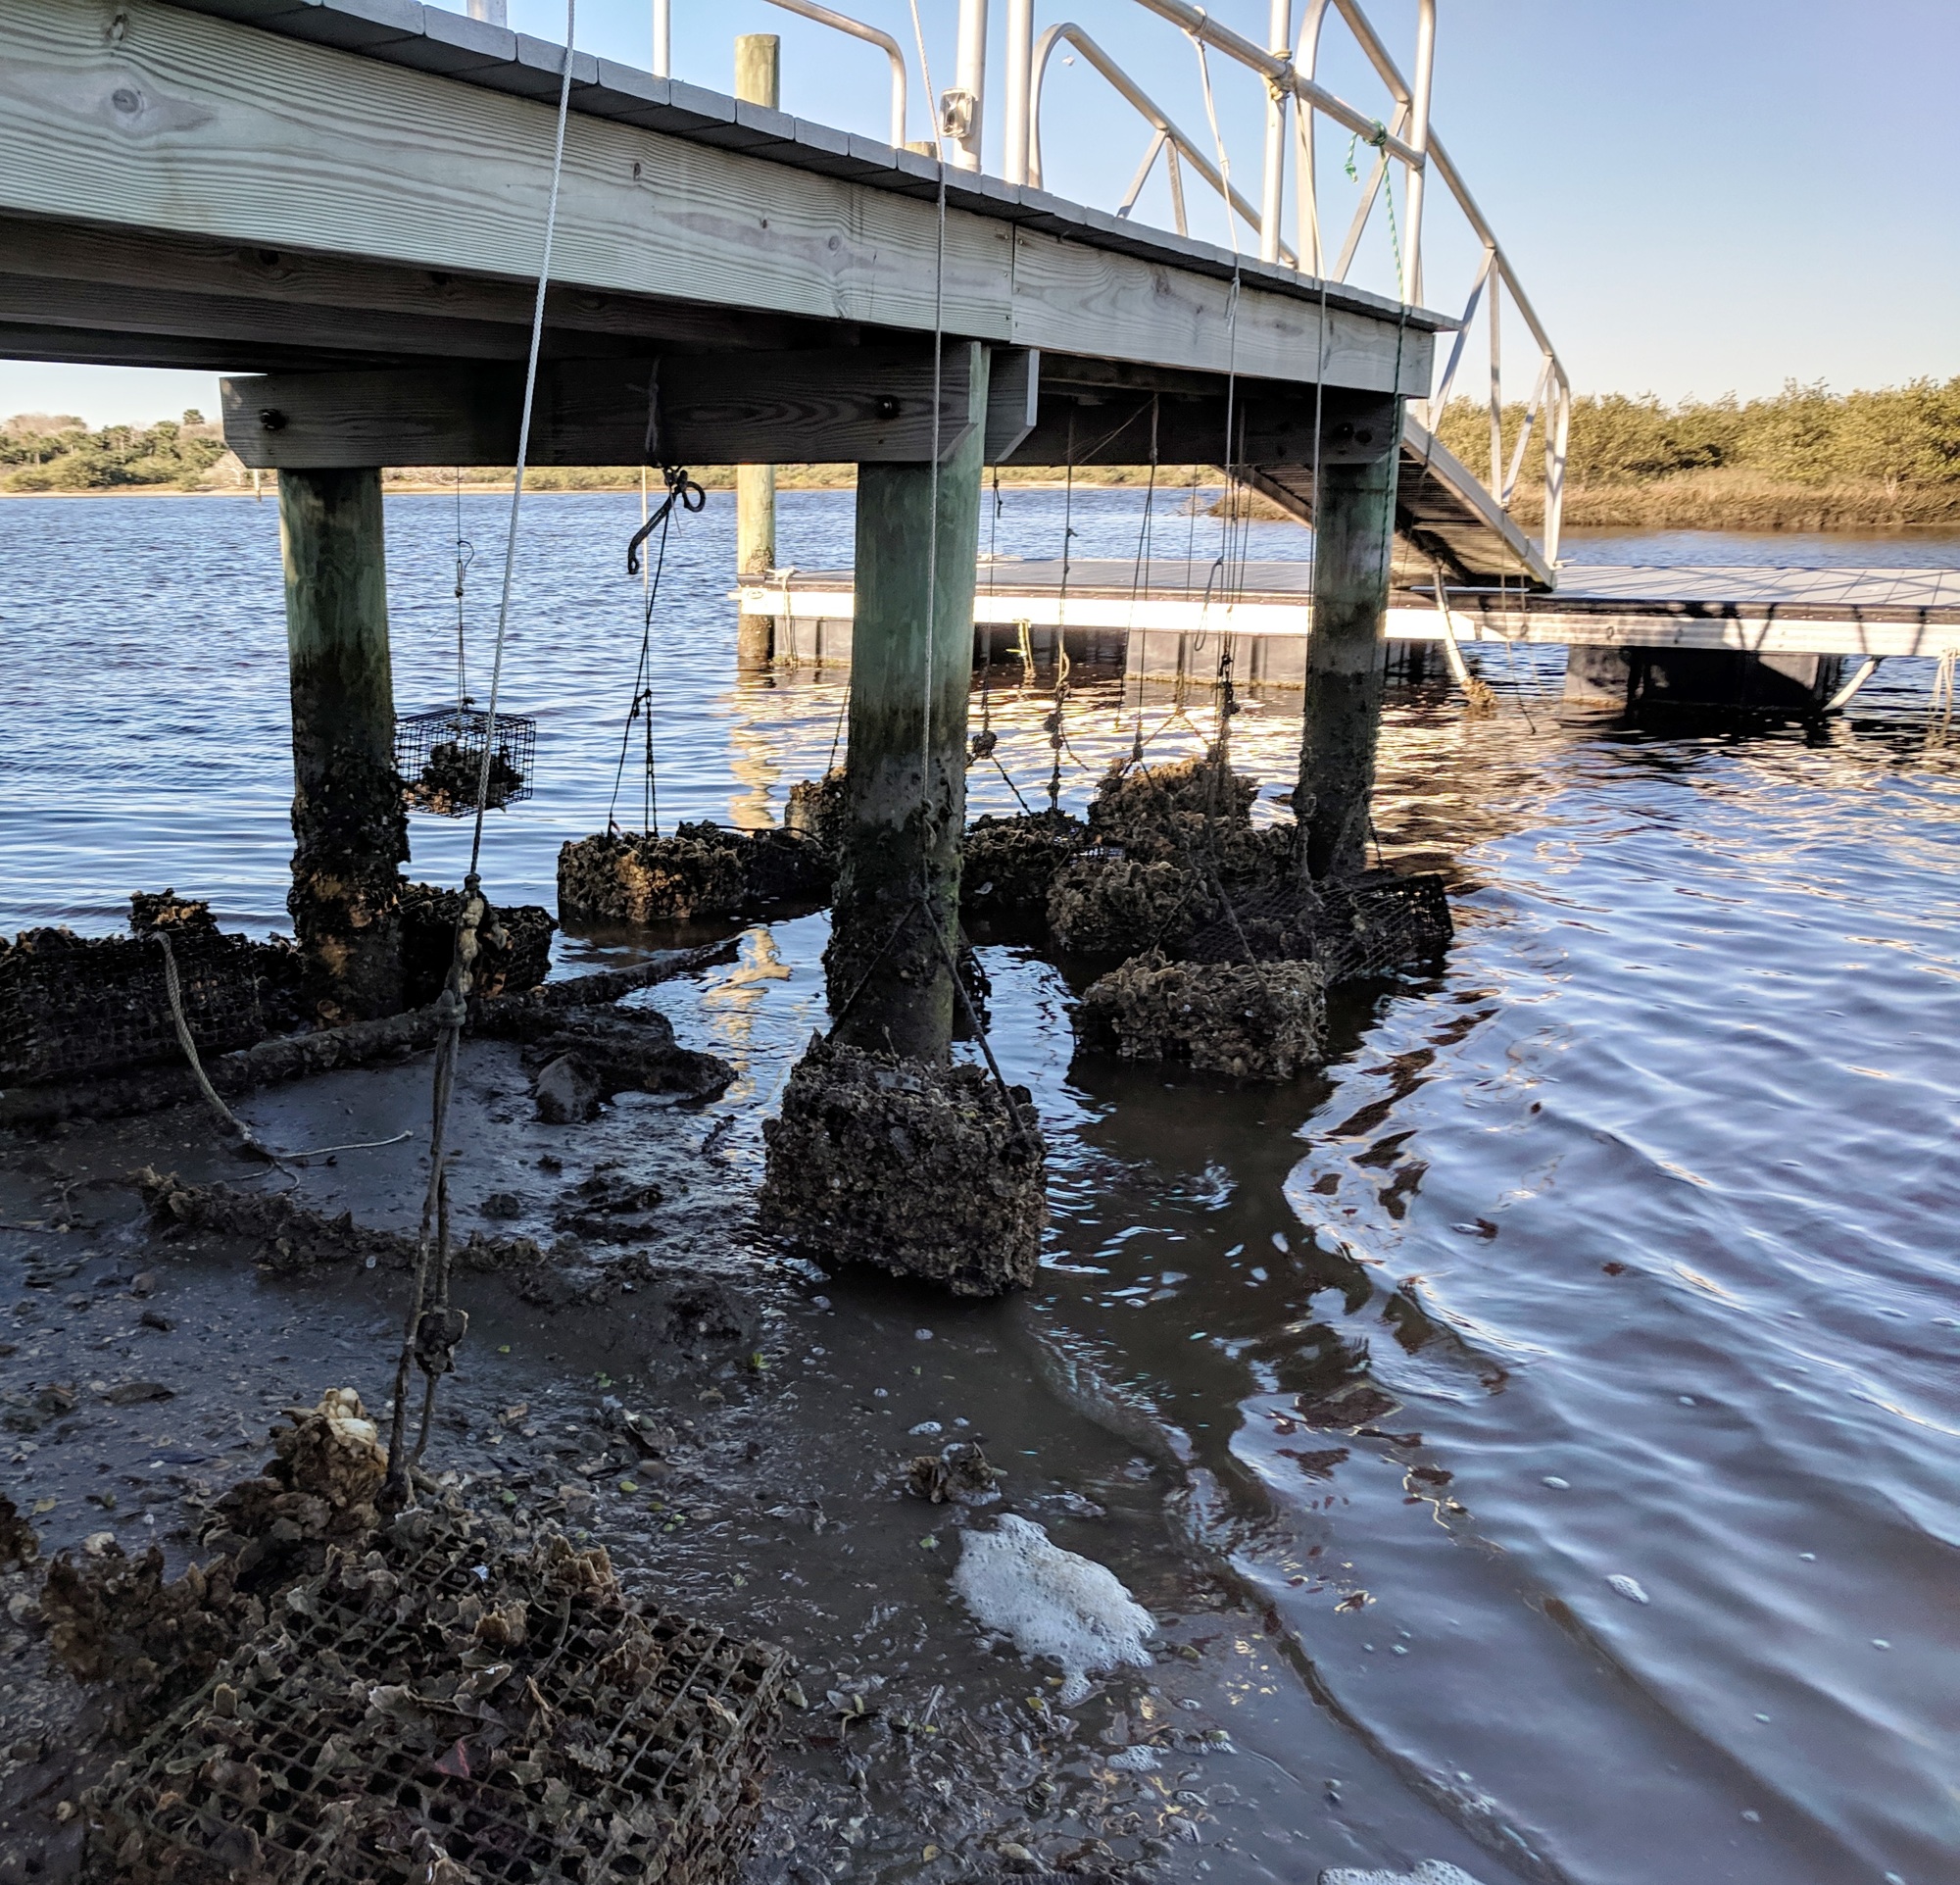 The University of Florida’s Whitney Laboratory for Marine Bioscience is seeking volunteers to become oyster gardeners as part of the lab’s oyster restoration initiative